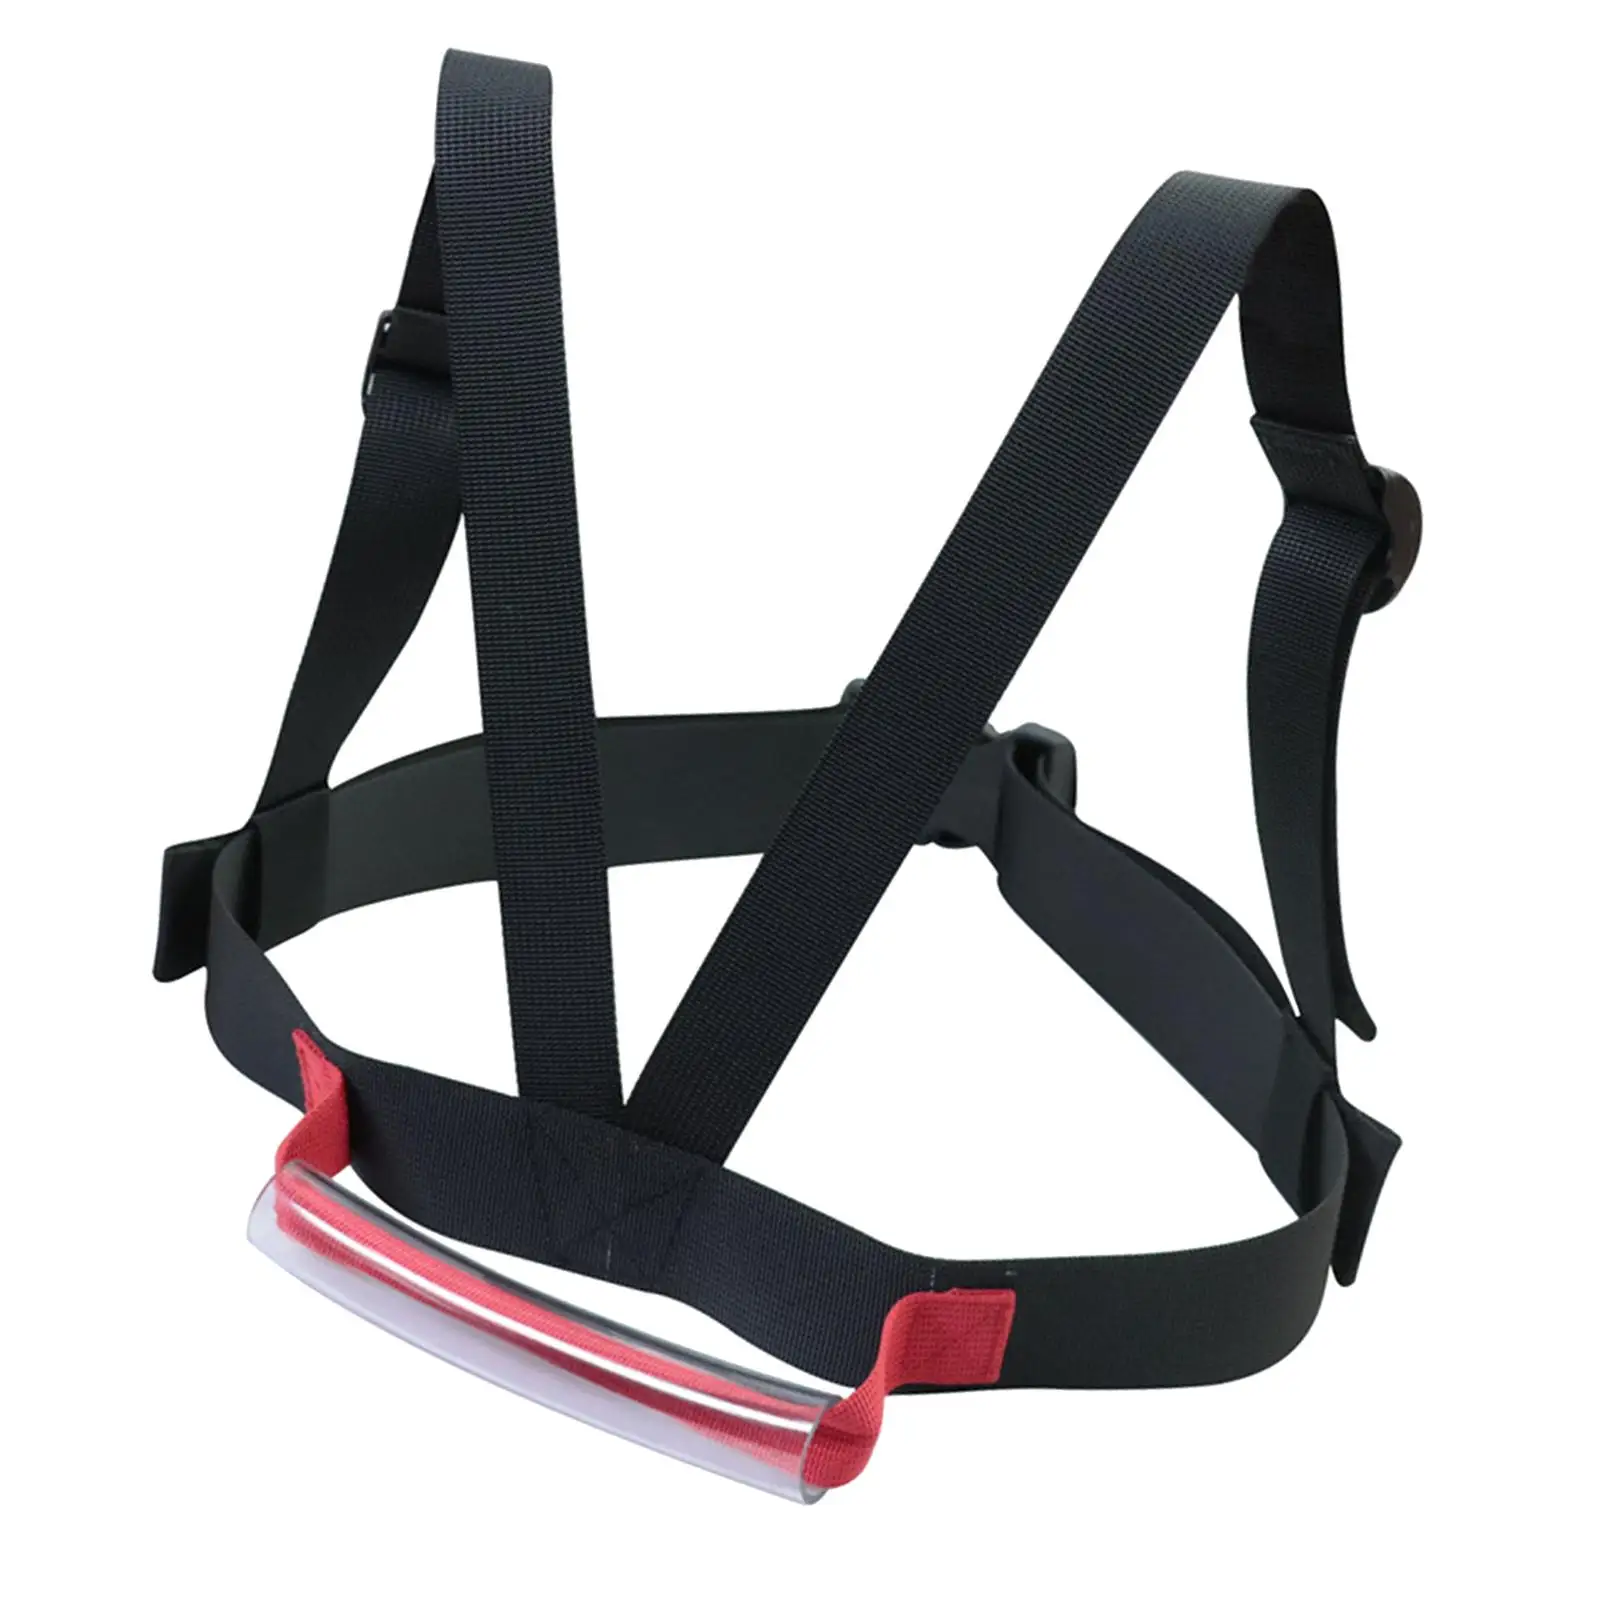 Kids Ski Training Harness, Safety Comfortable Ski and Snowboard Harness Trainer, Kids Ski Trainer-for Boys and Girls